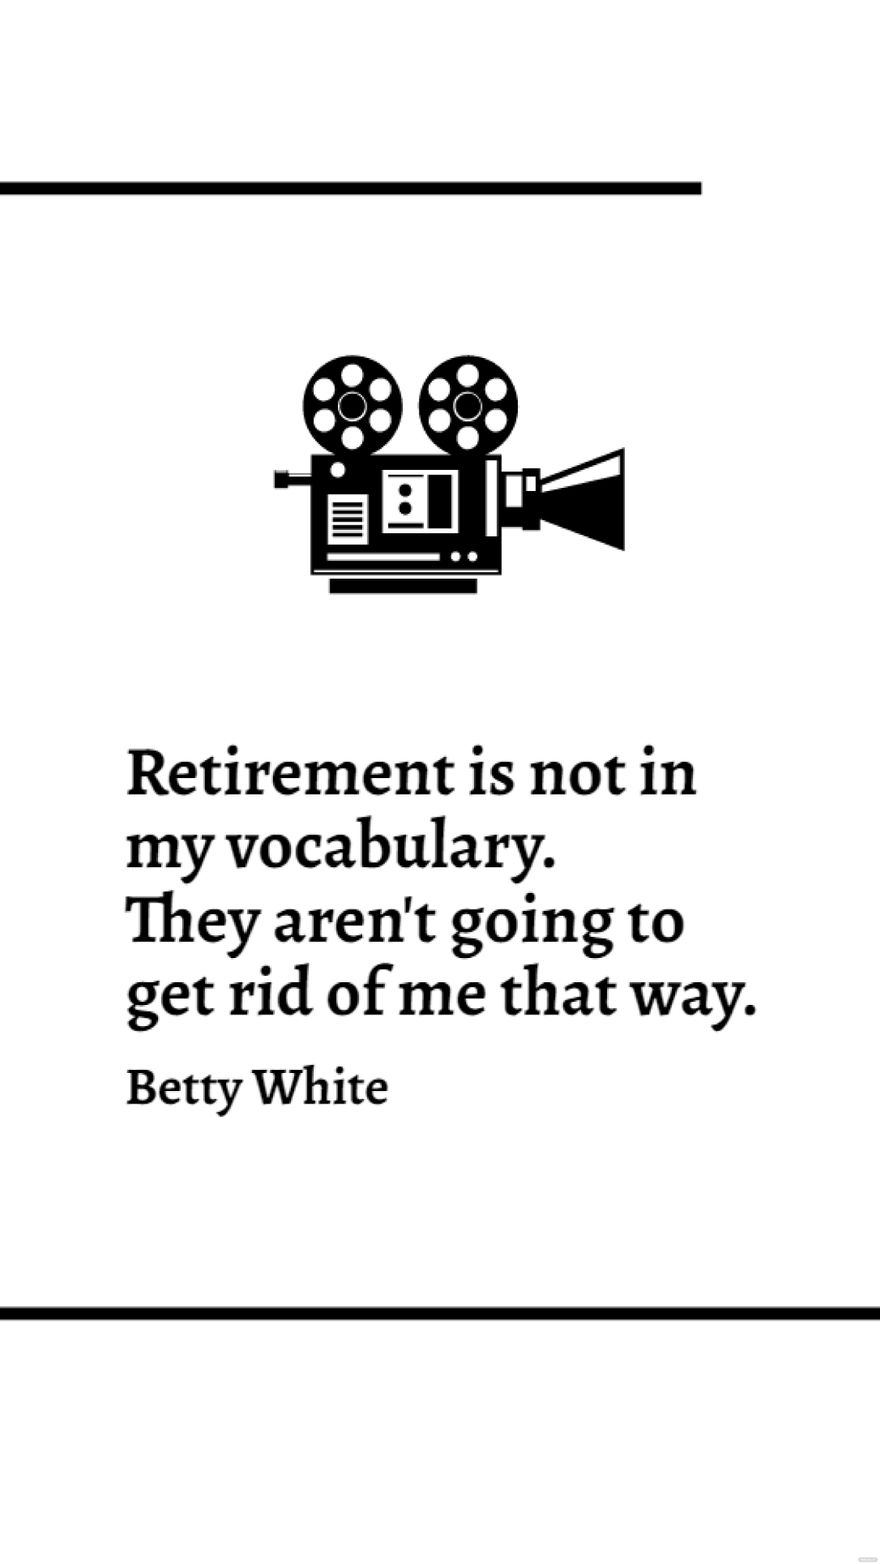 Betty White - Retirement is not in my vocabulary. They aren't going to get rid of me that way. in JPG